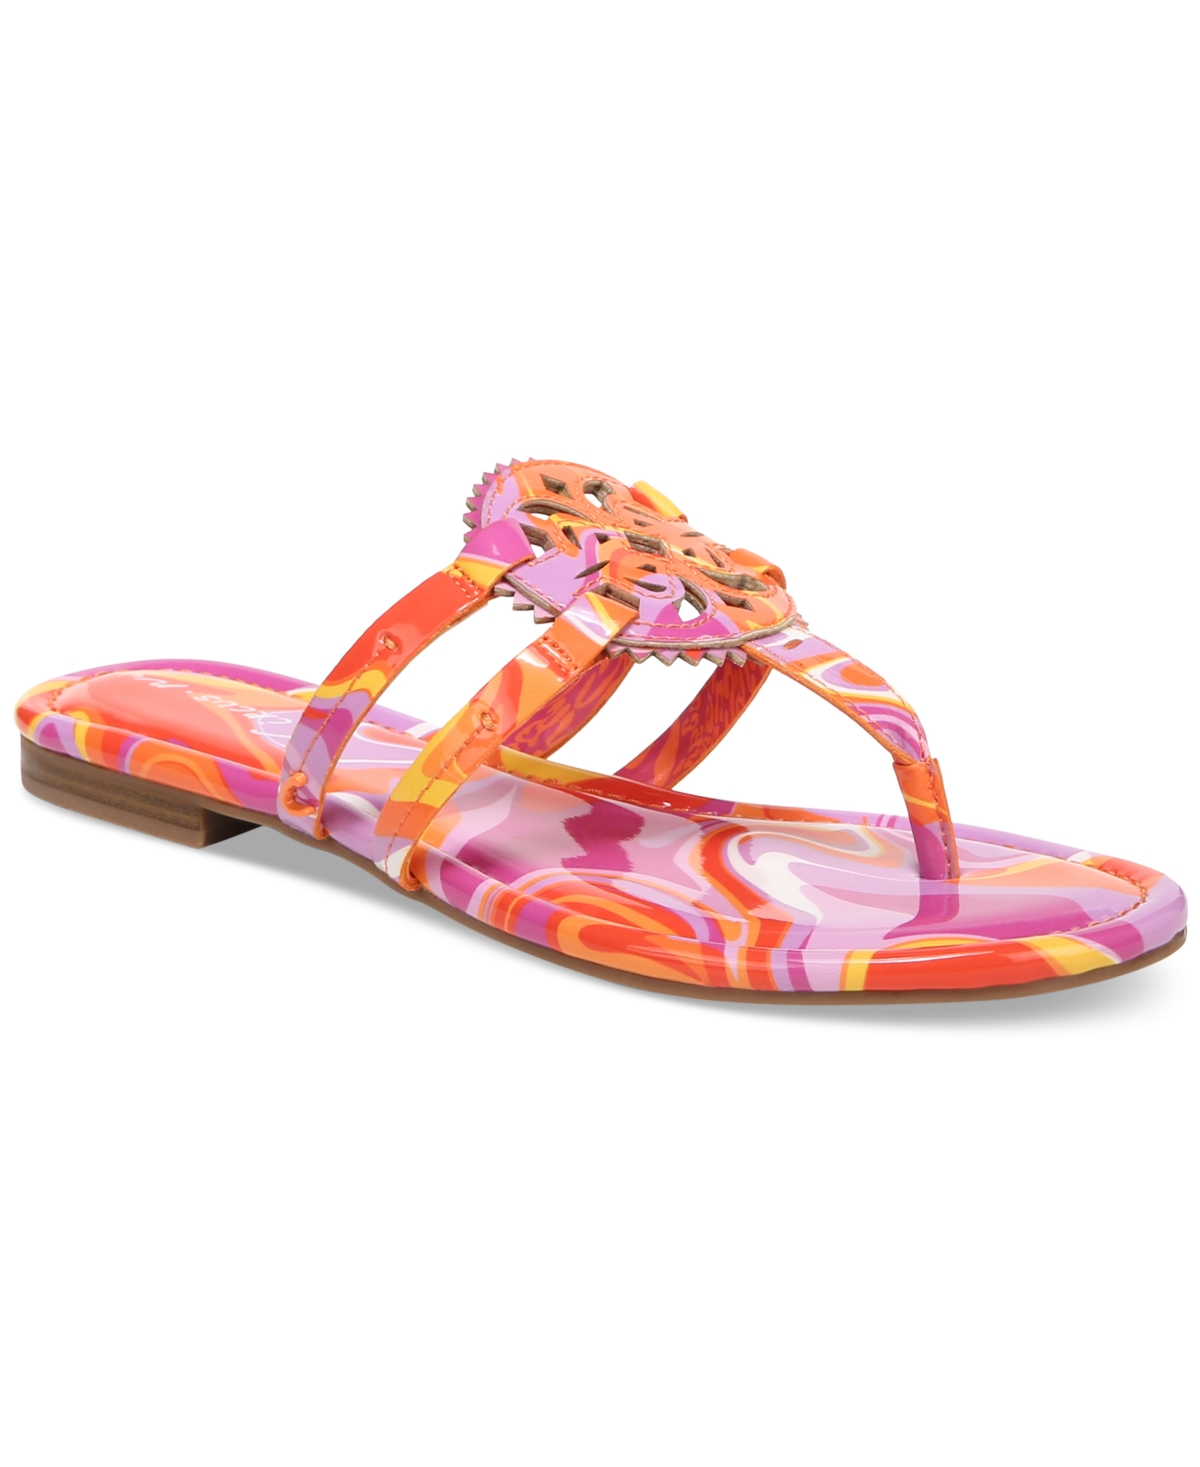 Circus Ny Women's Canyon Medallion Flat Sandals Women's Shoes